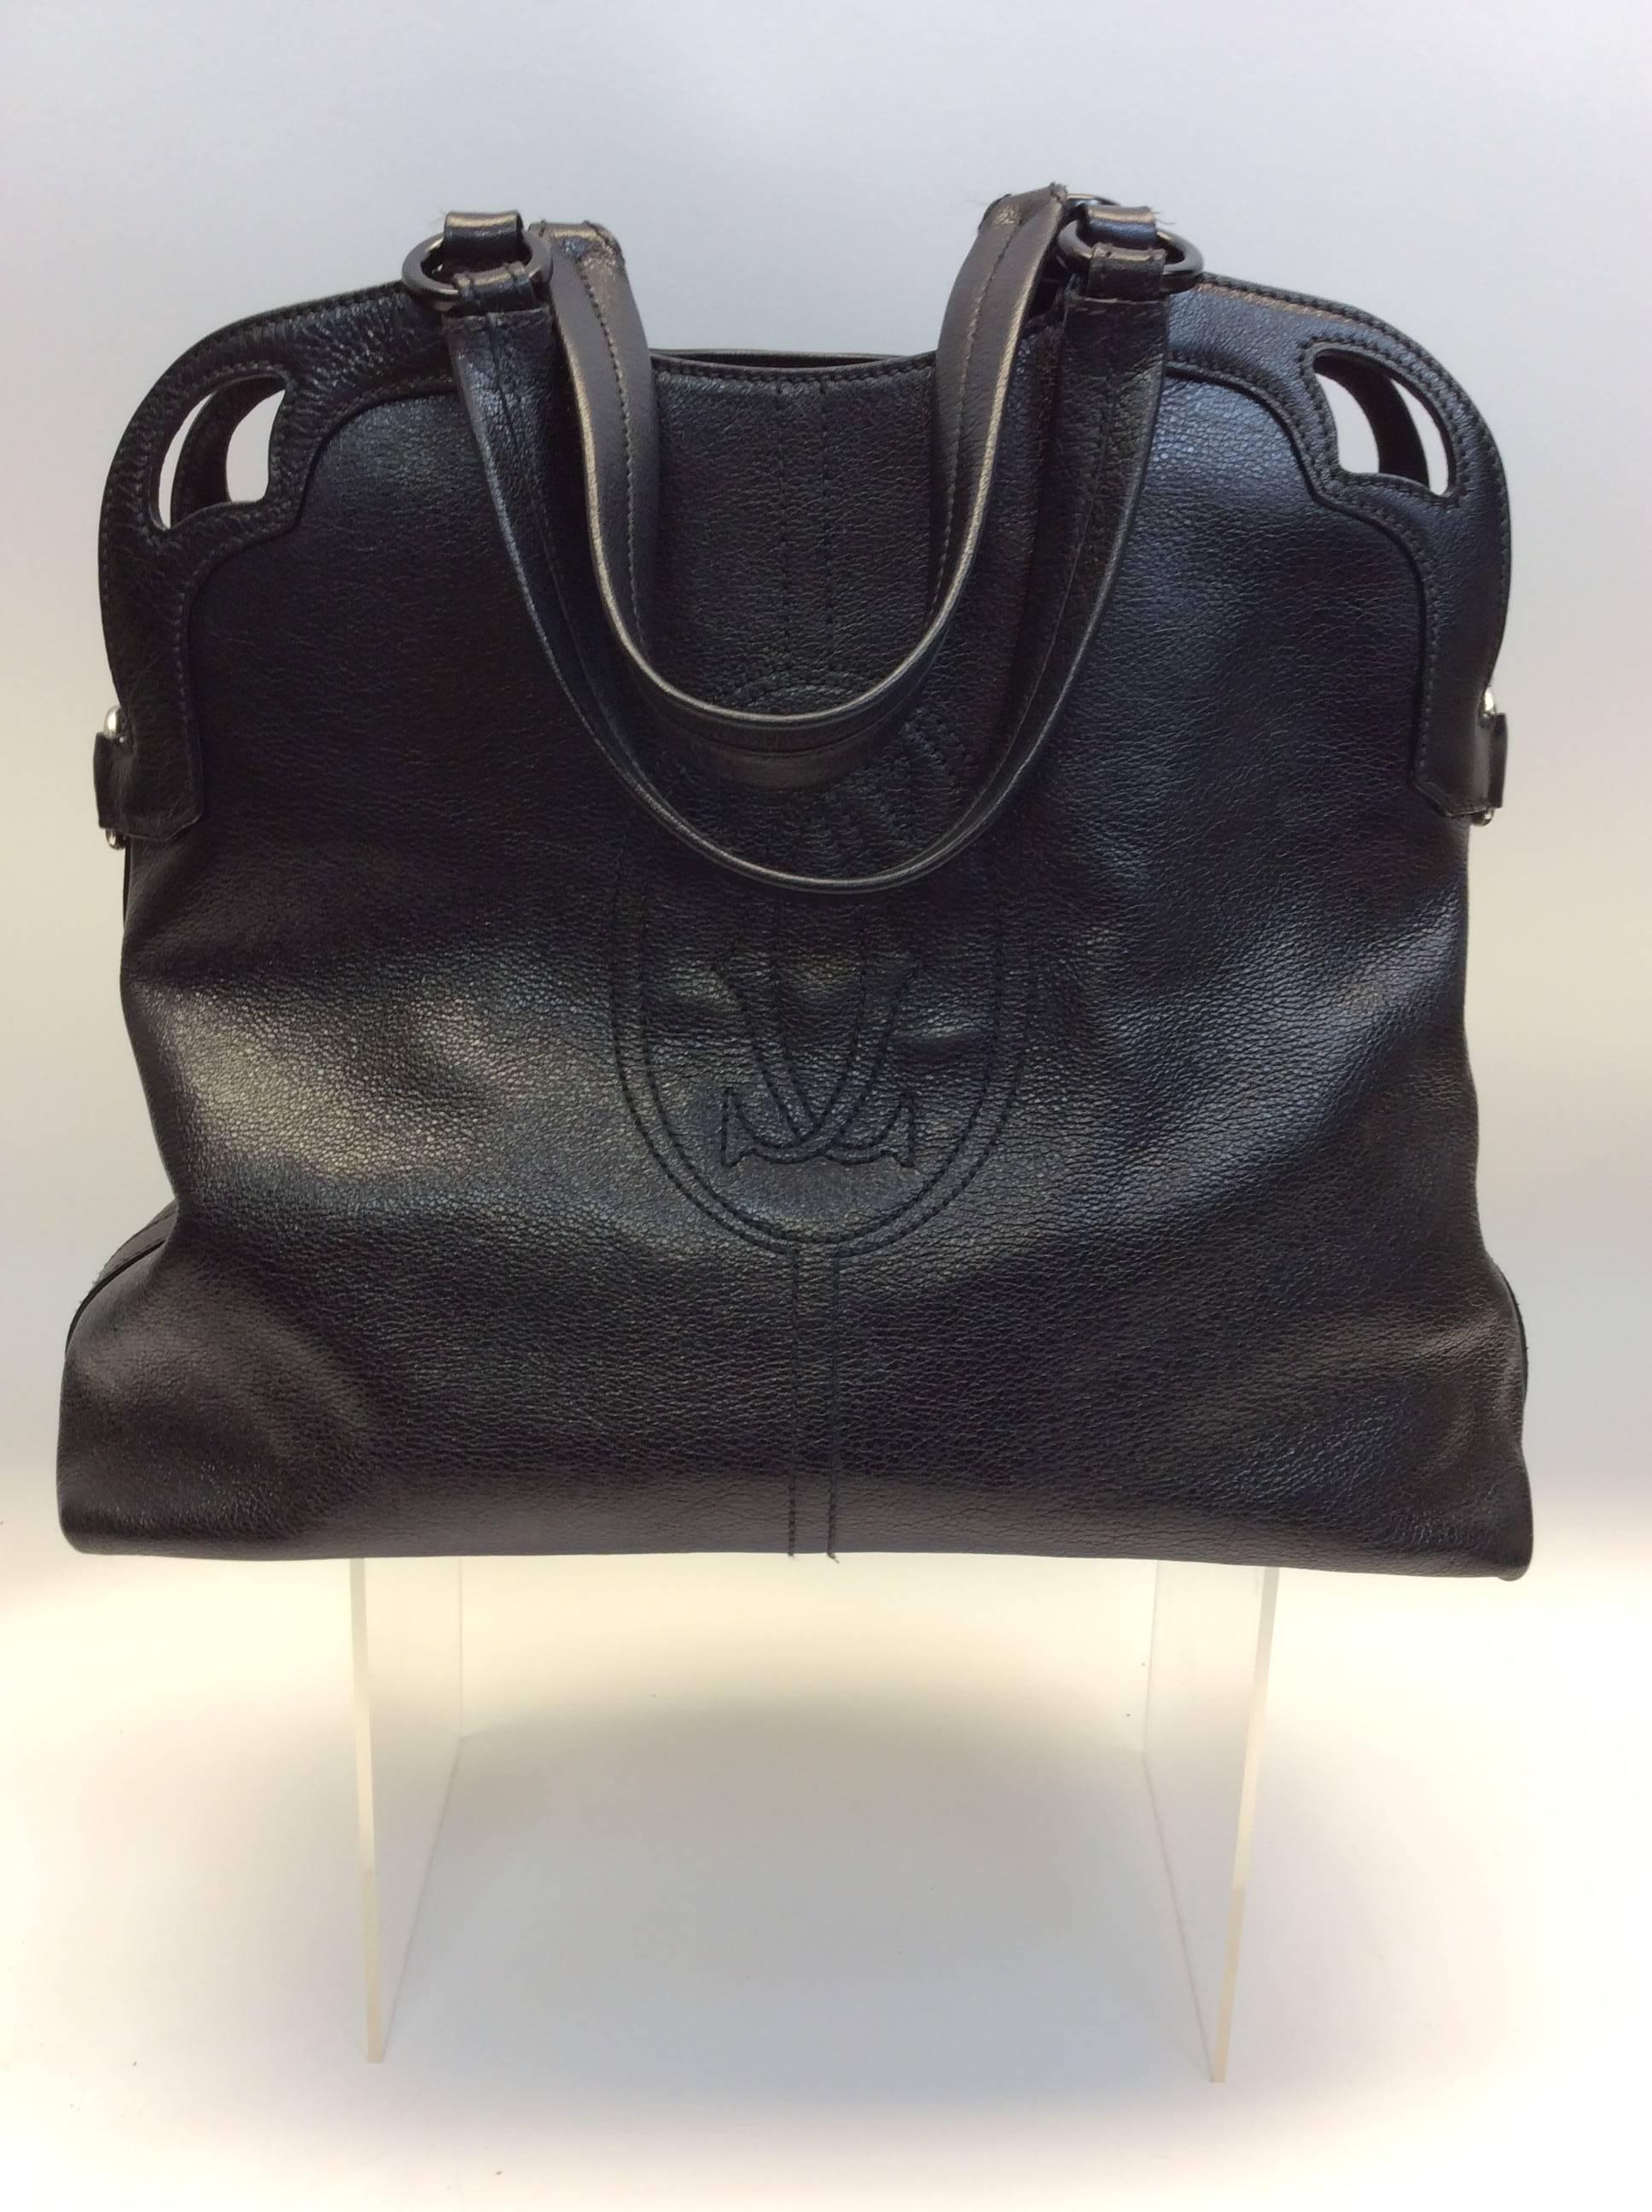 Cartier Black Leather Marcello Large Handbag In Excellent Condition For Sale In Narberth, PA